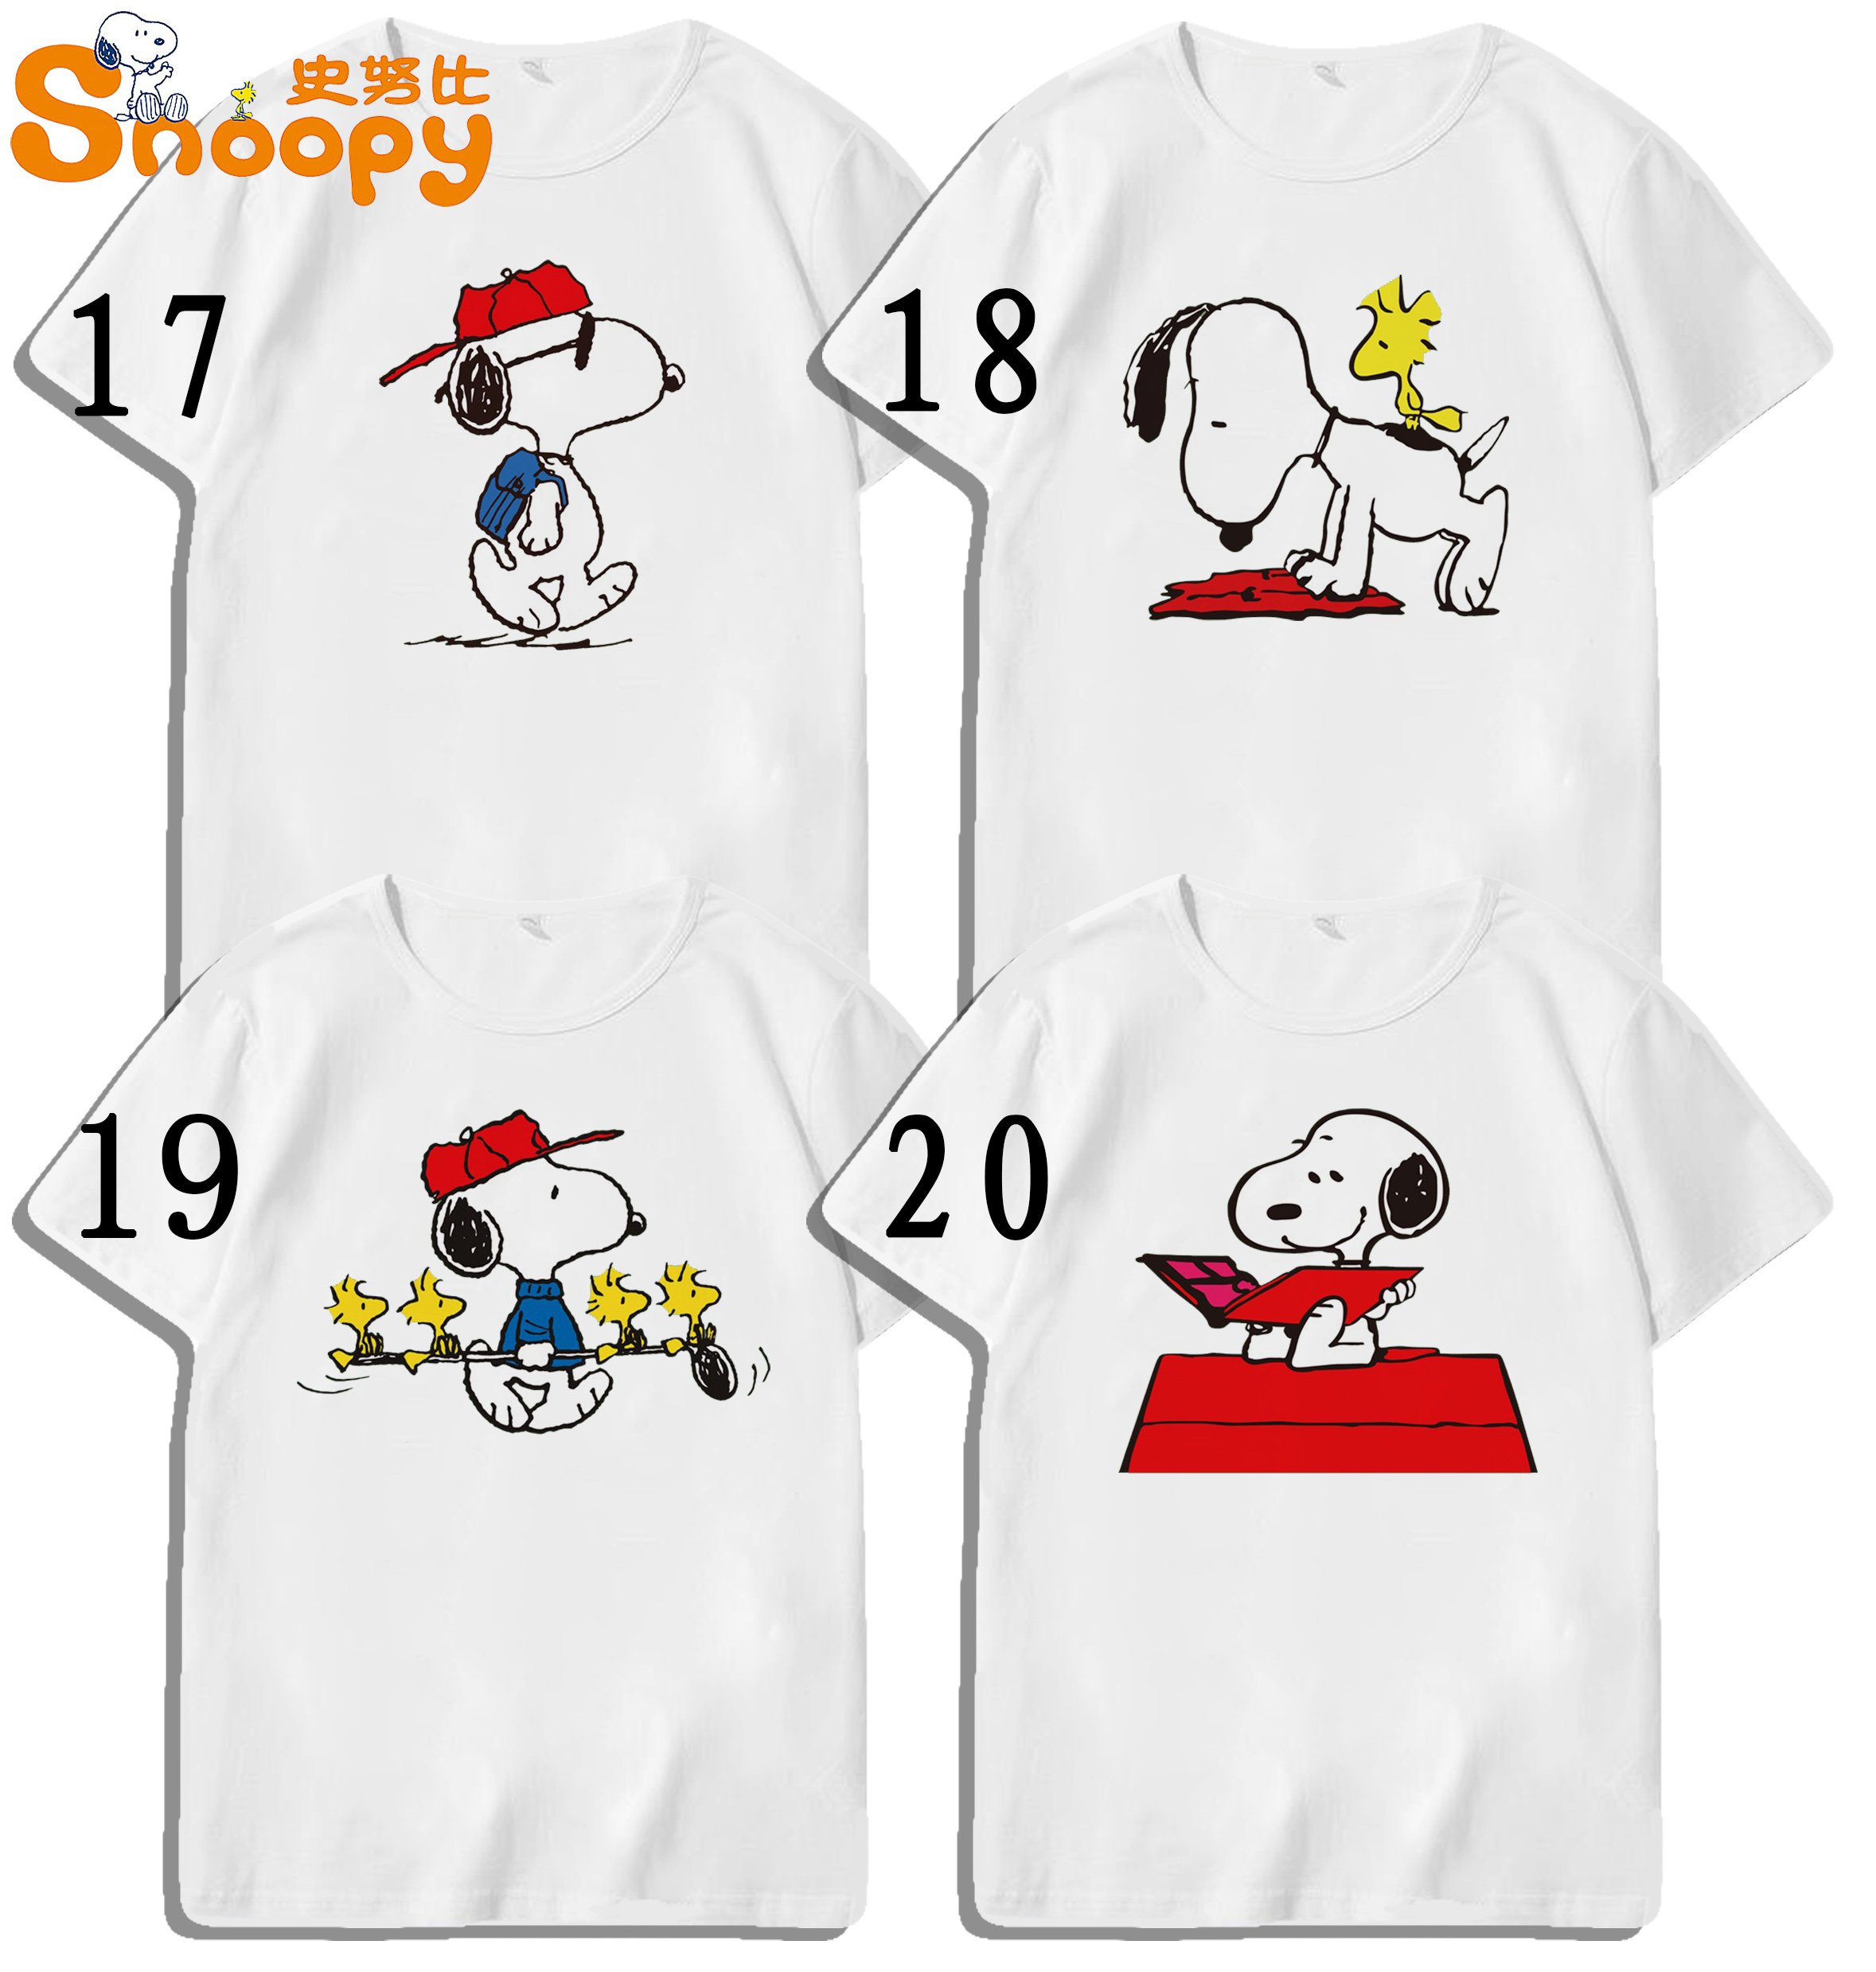 Peanut snoopyTshirt  Printed Graphic Short Sleeves T-Shirt Family Matching T-shirt Mommy/daddy and Kids Game T Shirt Children Boys Girls Summer Catoon Clothing Tees Custom